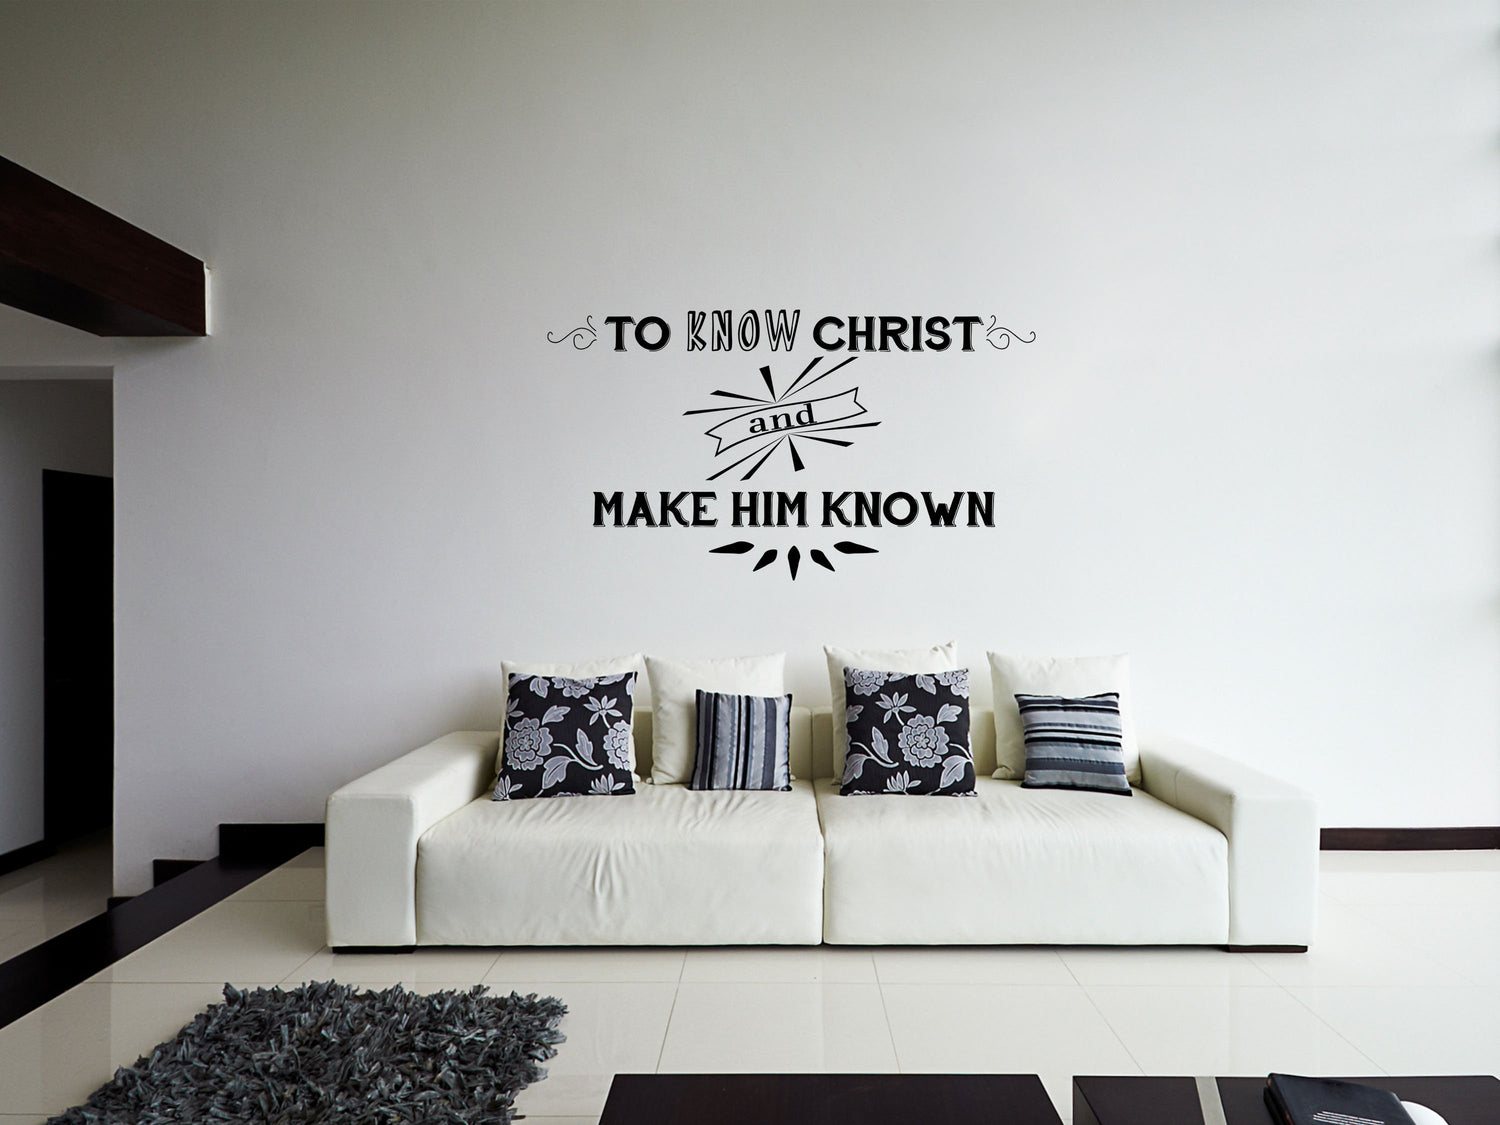 To Know Christ Decal - Know Christ Vinyl Decal - Religious Wall Decals - Inspirational Wall Decor - Make Christ Known Sign Vinyl Wall Decal Done 